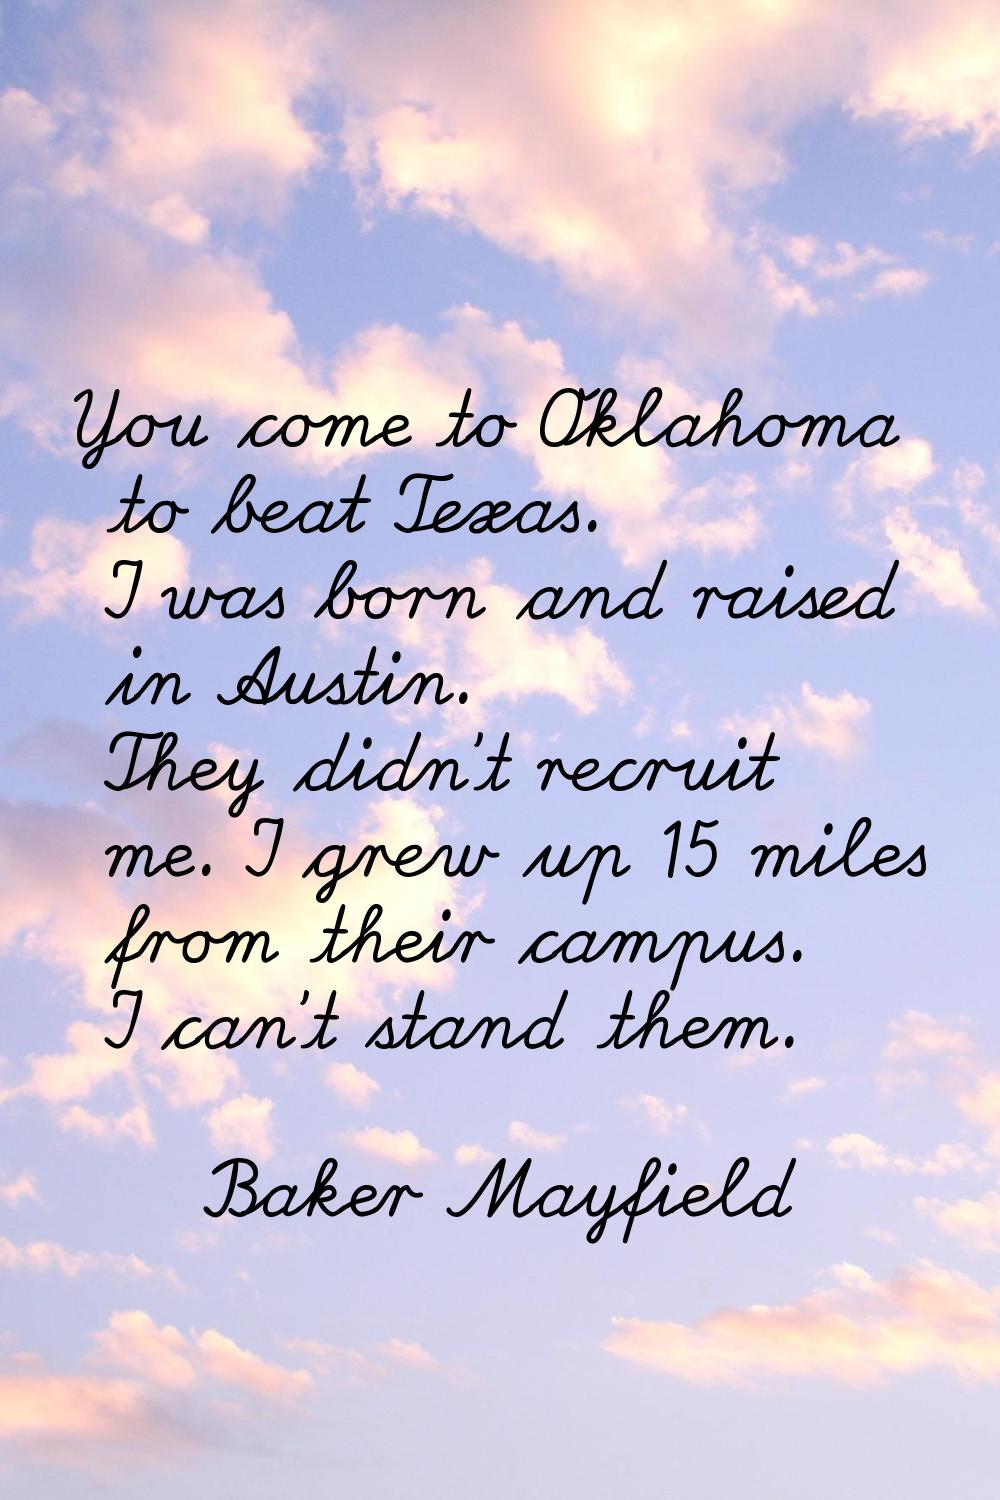 You come to Oklahoma to beat Texas. I was born and raised in Austin. They didn't recruit me. I grew